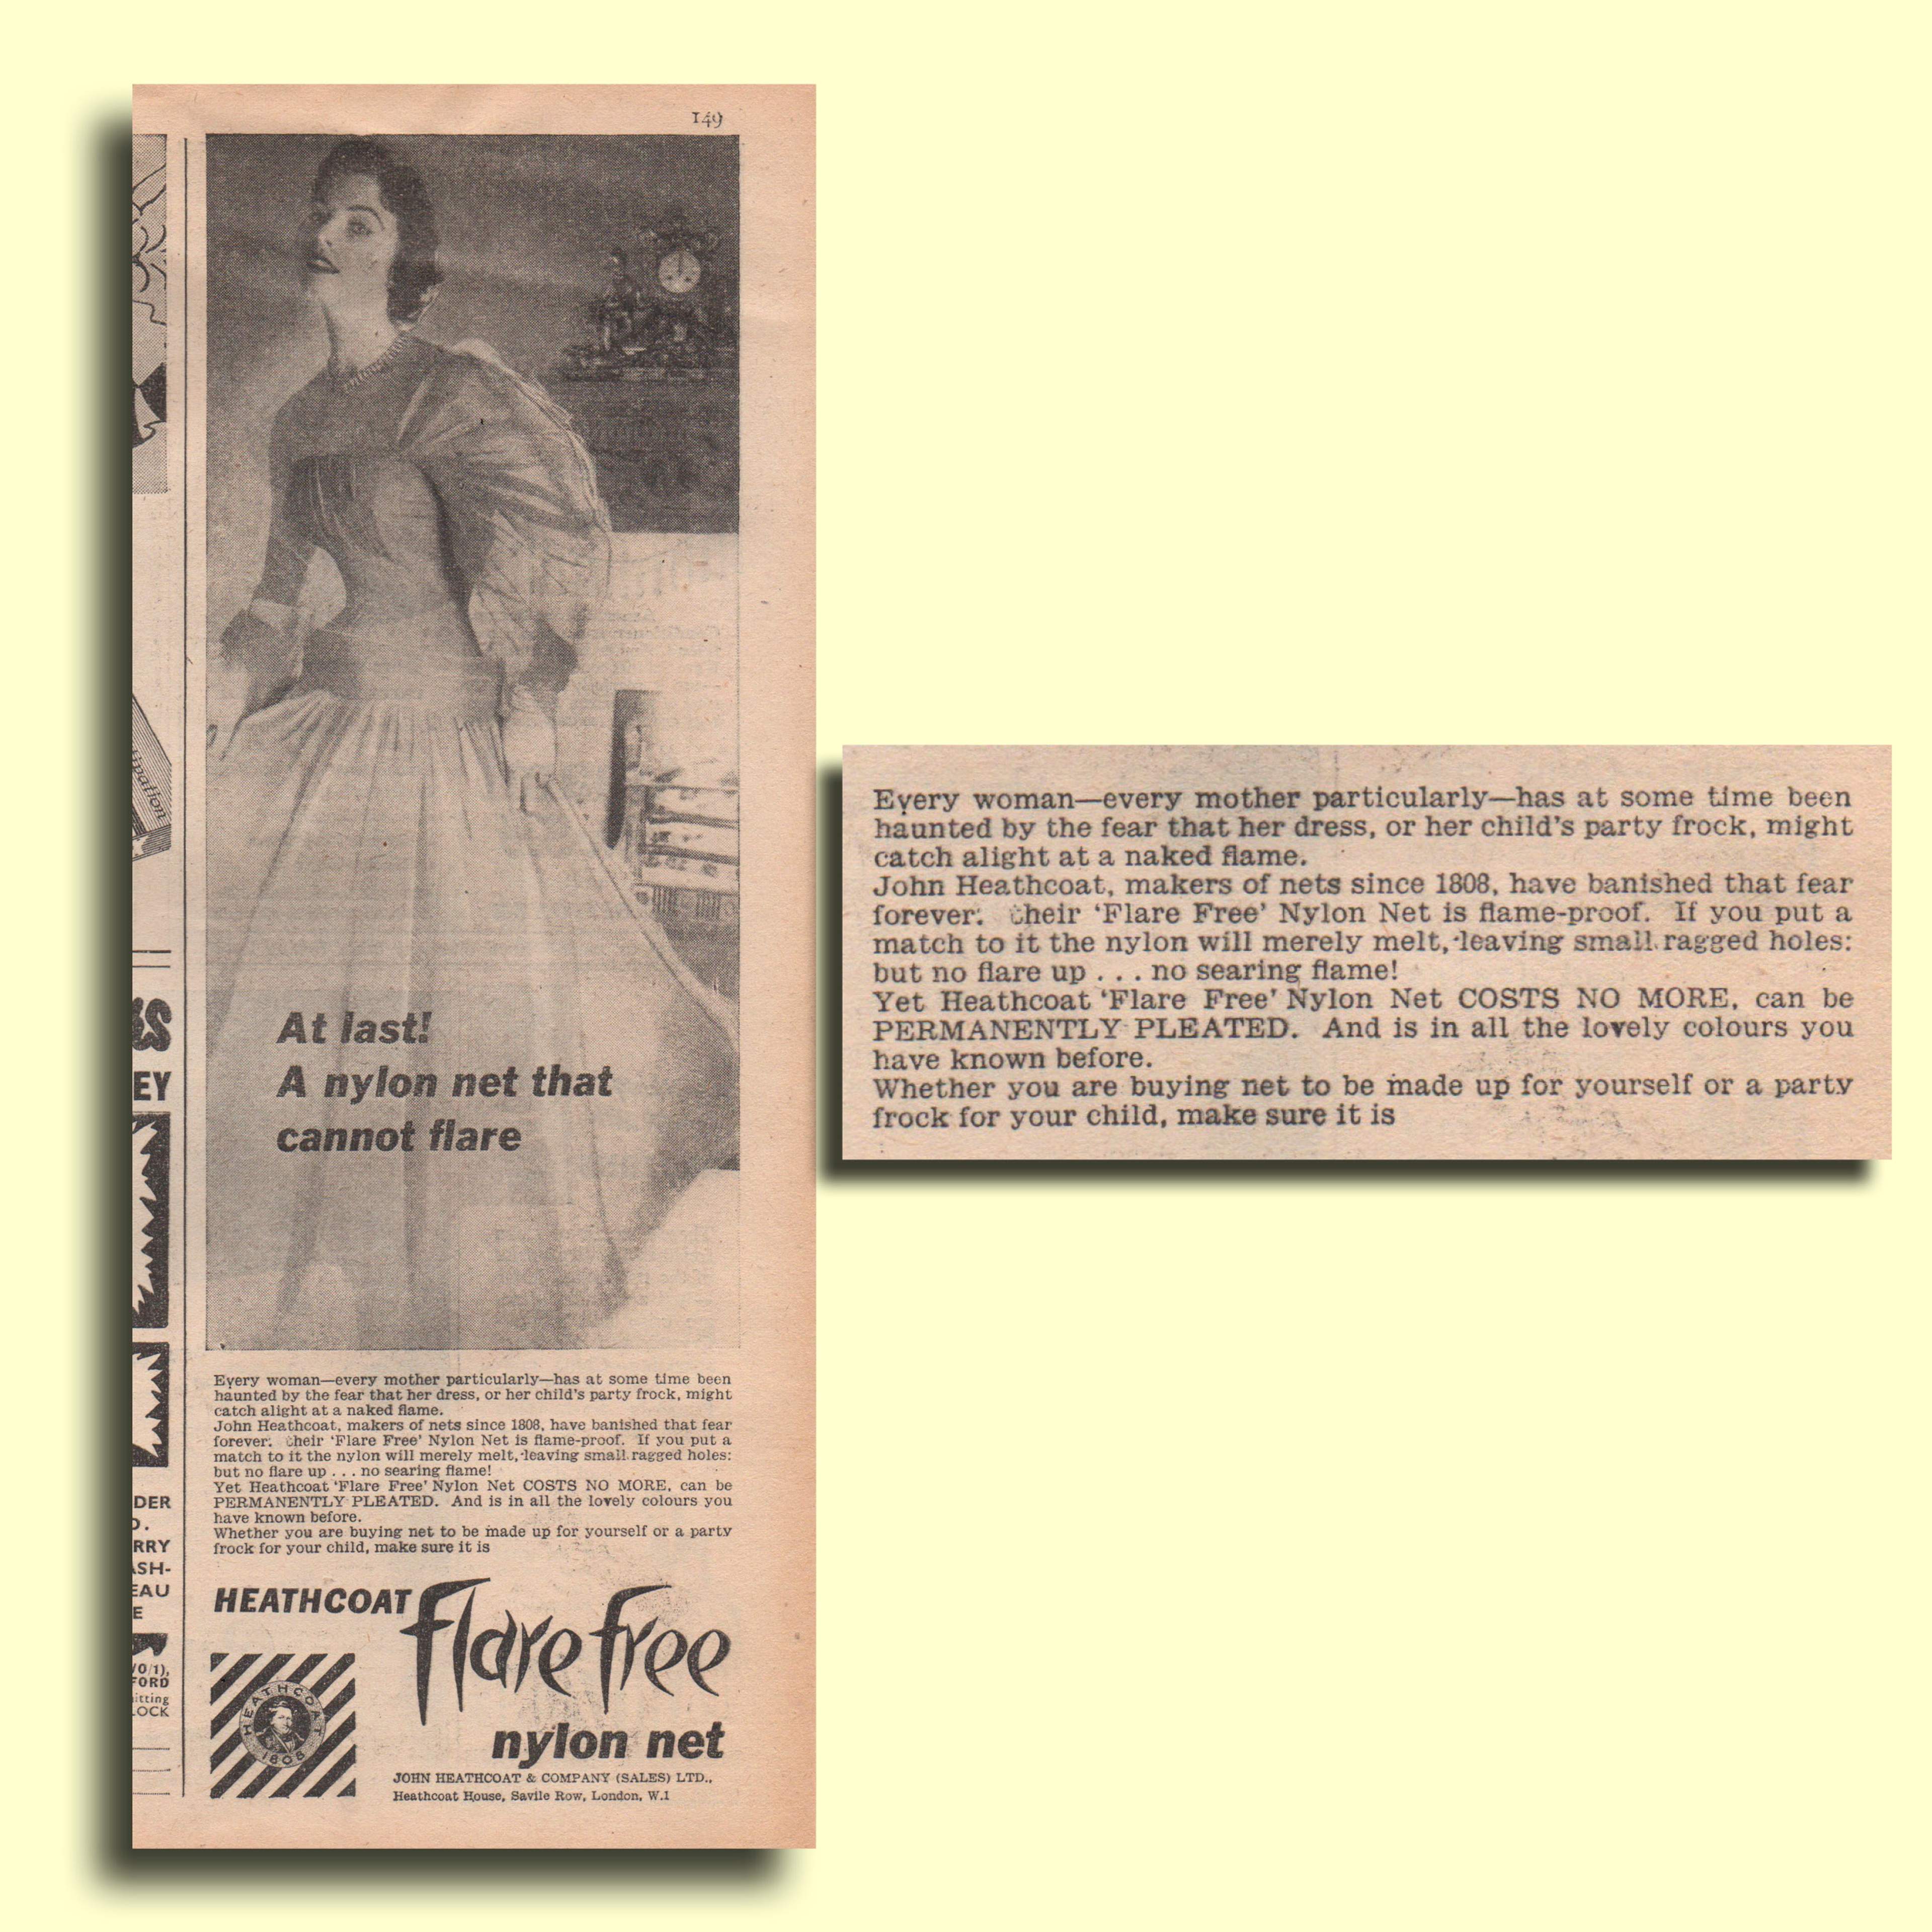 1955 black and white advert for Heathcott Flare Free outfits. A woman is wearing a nylon flare free outfit.